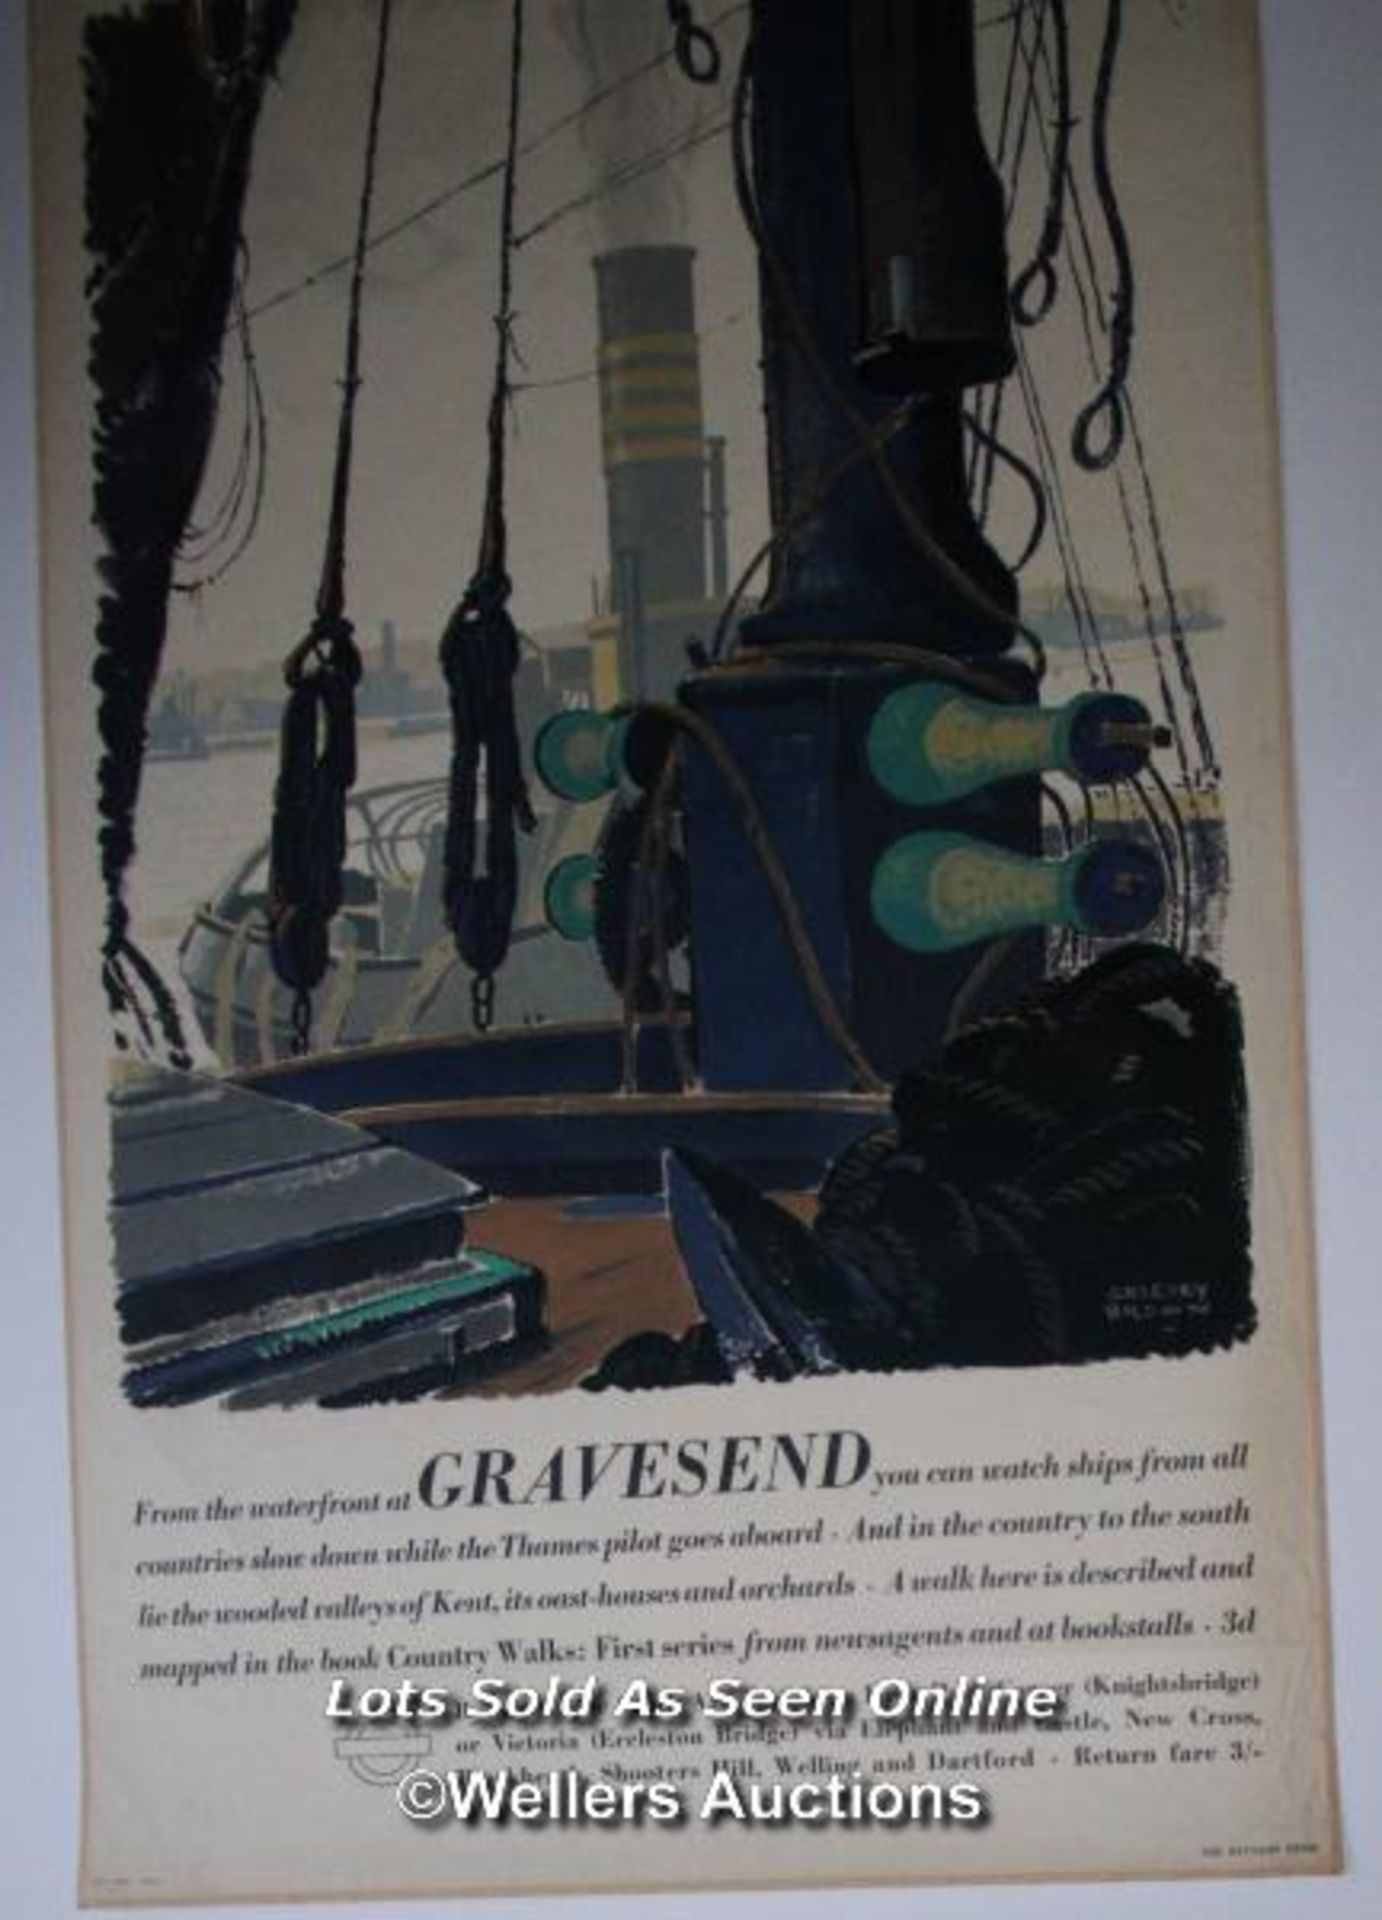 Vintage London Transport poster 'Gravesend' by Gregory Brown c1937, double royal, 40 x 25 inches, - Image 2 of 5